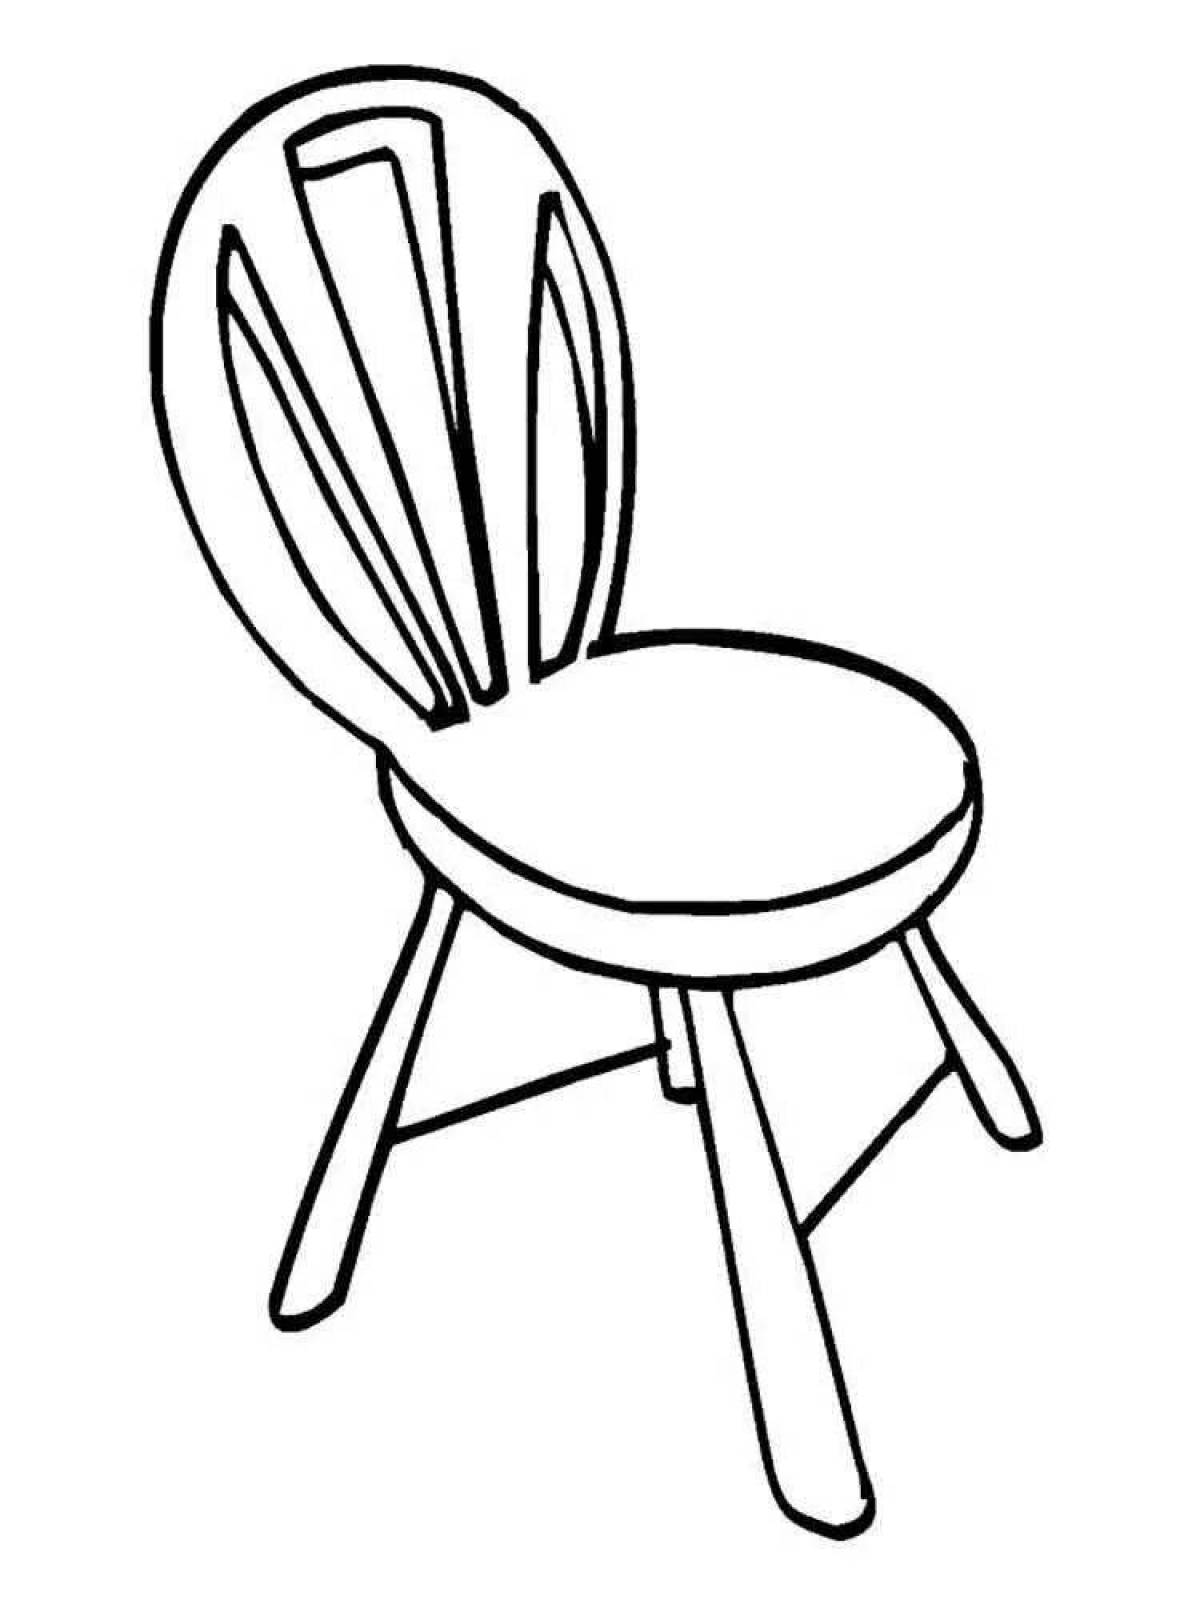 Fun chair coloring for kids